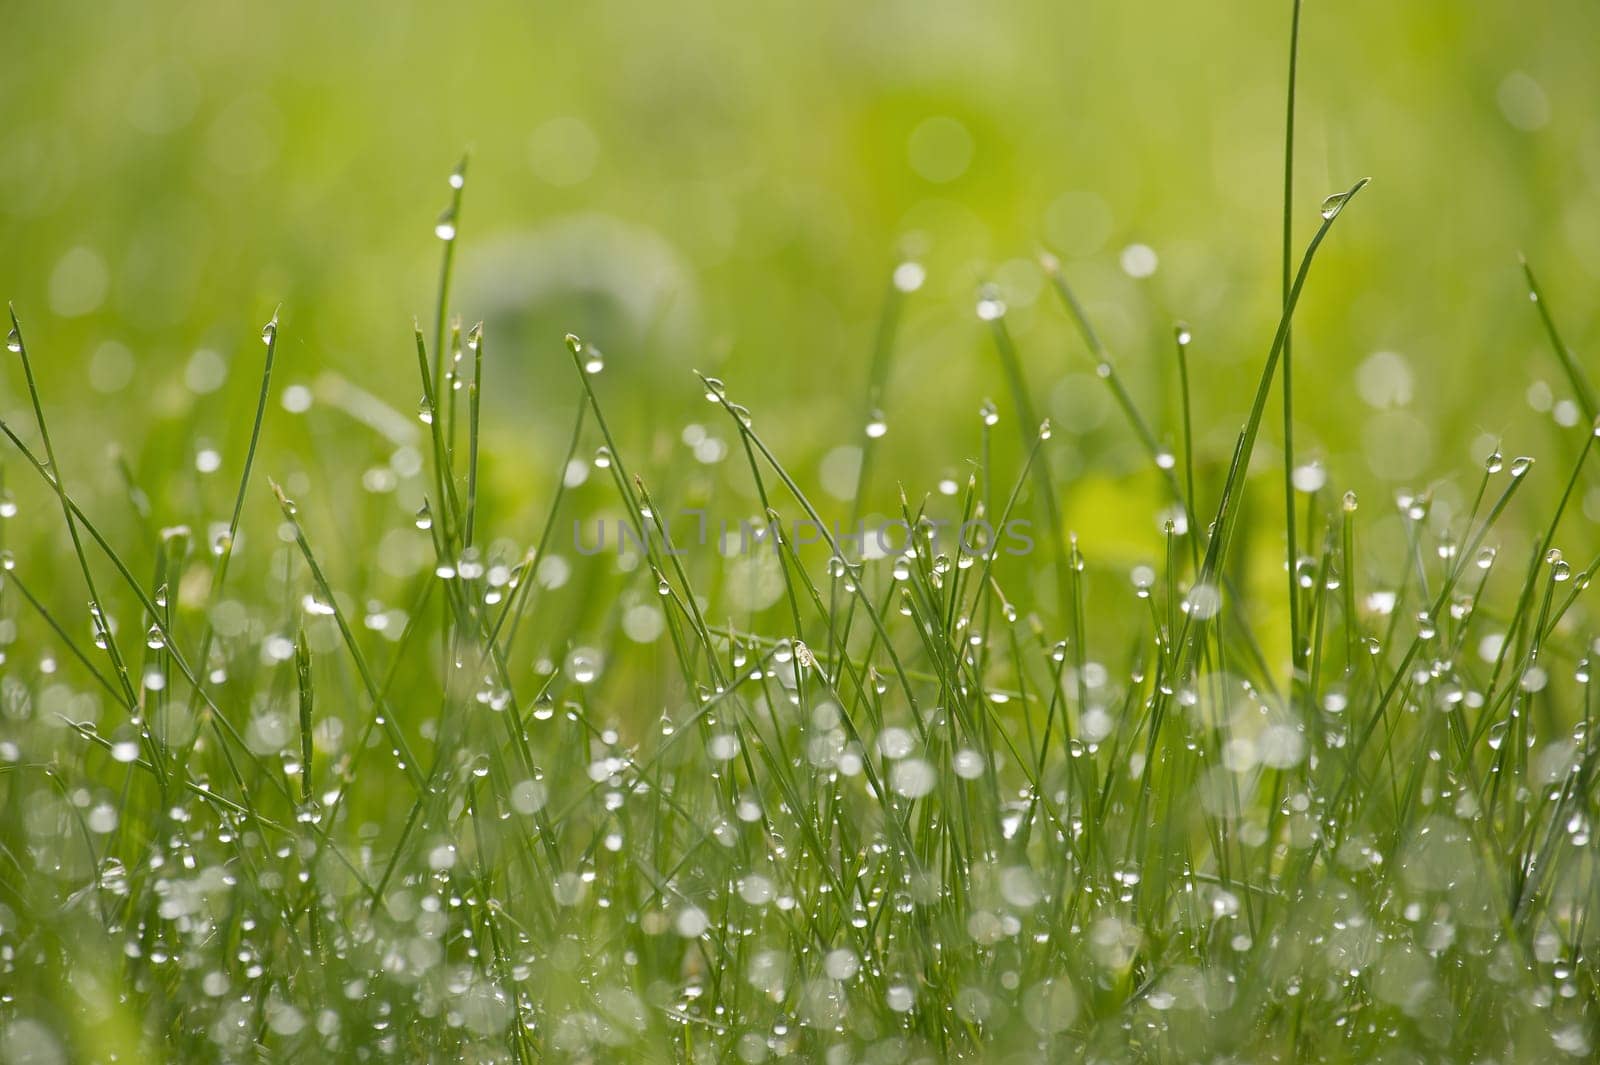 Close up view of a vibrant green field of grass covered in glistening water droplets, background is out of focus, contributing to a tranquil atmosphere